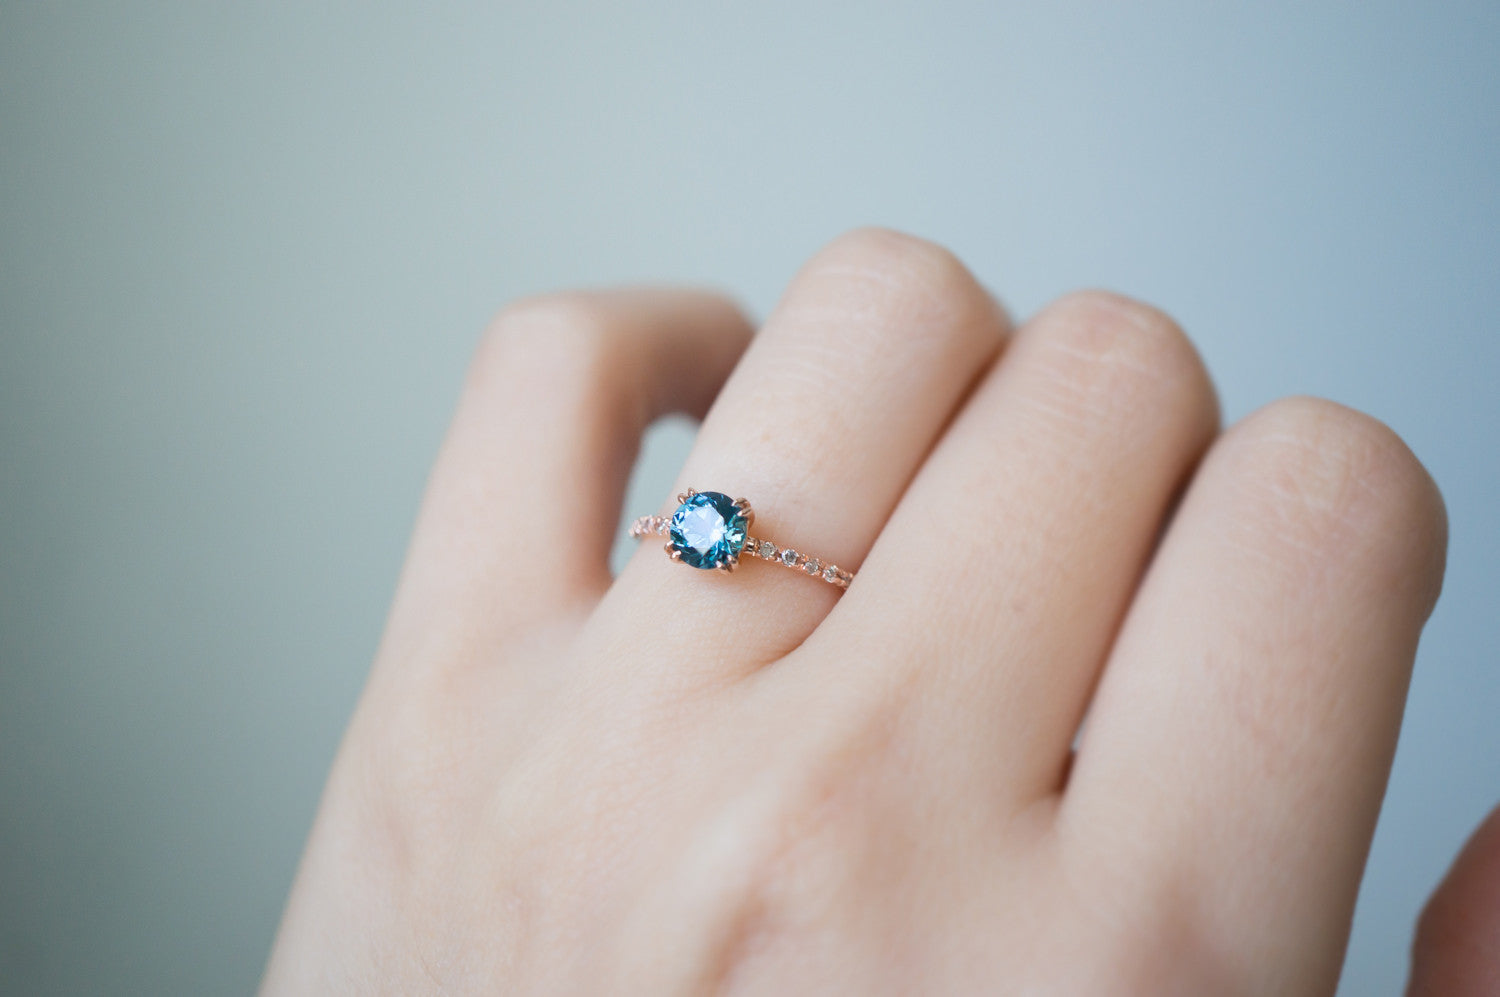 Sky Blue Montana Sapphire Solitaire Engagement Ring - S. Kind & Co